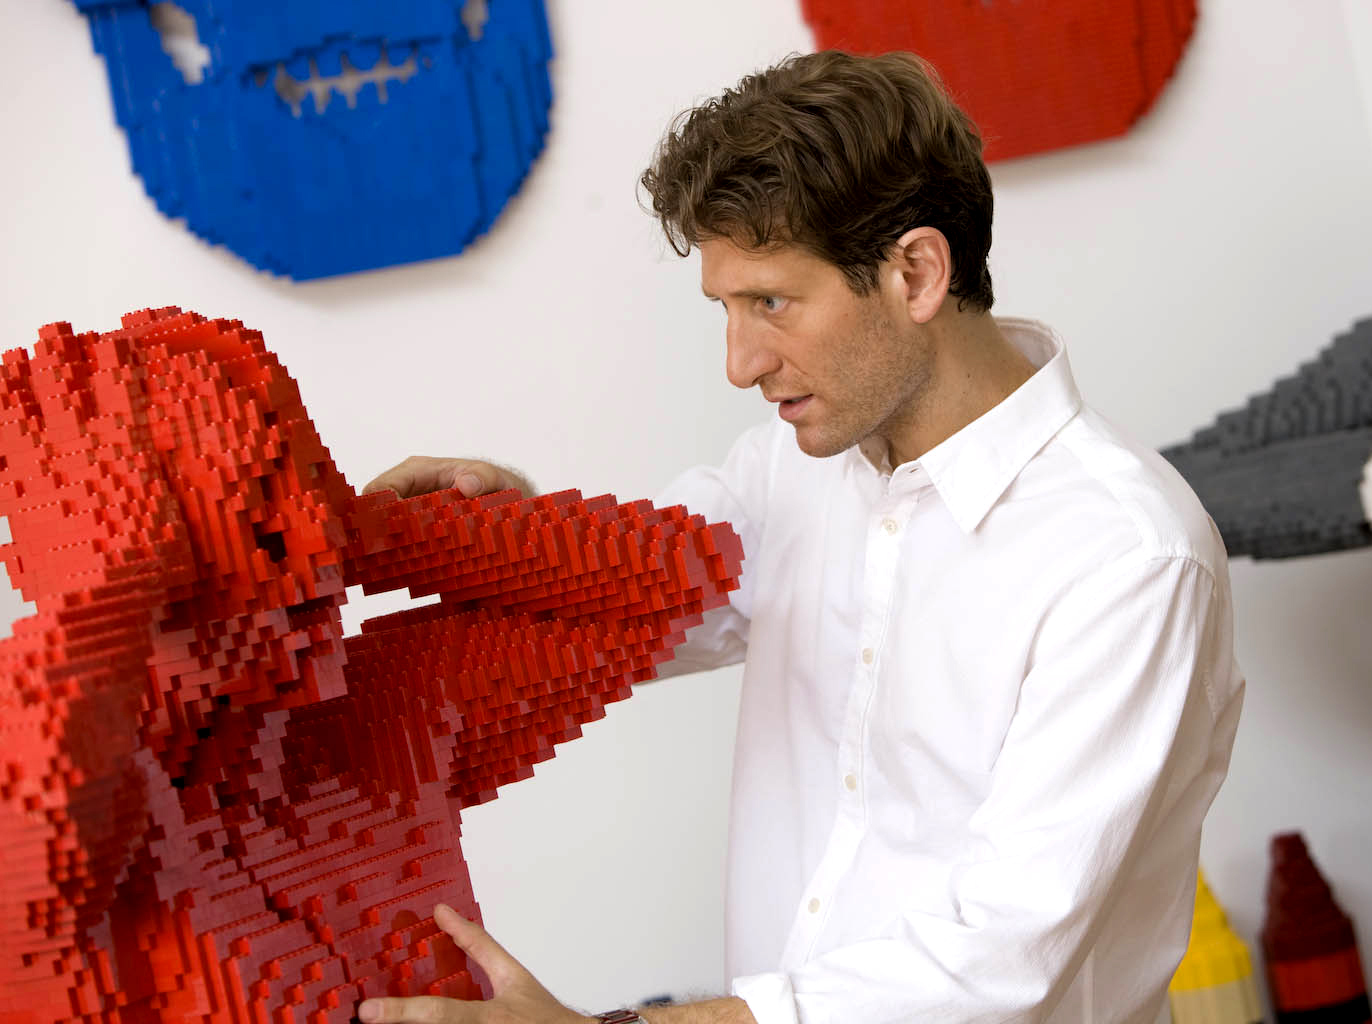 Nathan Saway with a Lego sculpture